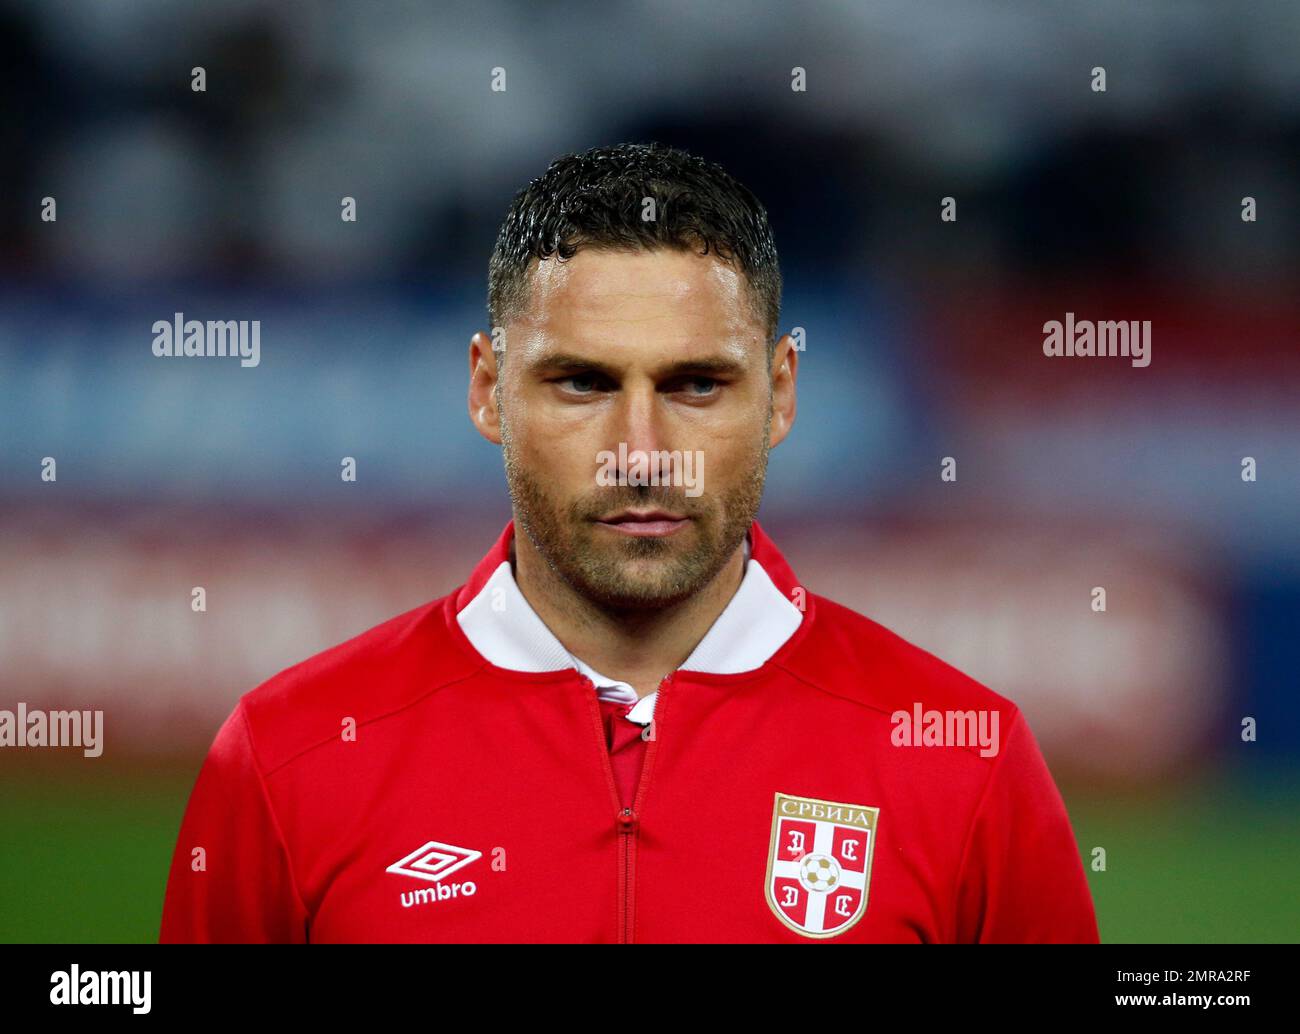 Serbia's national soccer team player Dusko Tosic prior to playing their World Cup Group D qualifying soccer match between Serbia and Georgia at the Rajko Mitic stadium in Belgrade, Serbia, Monday, Oct. 9, 2017. (AP Photo/Darko Vojinovic) Stock Photo